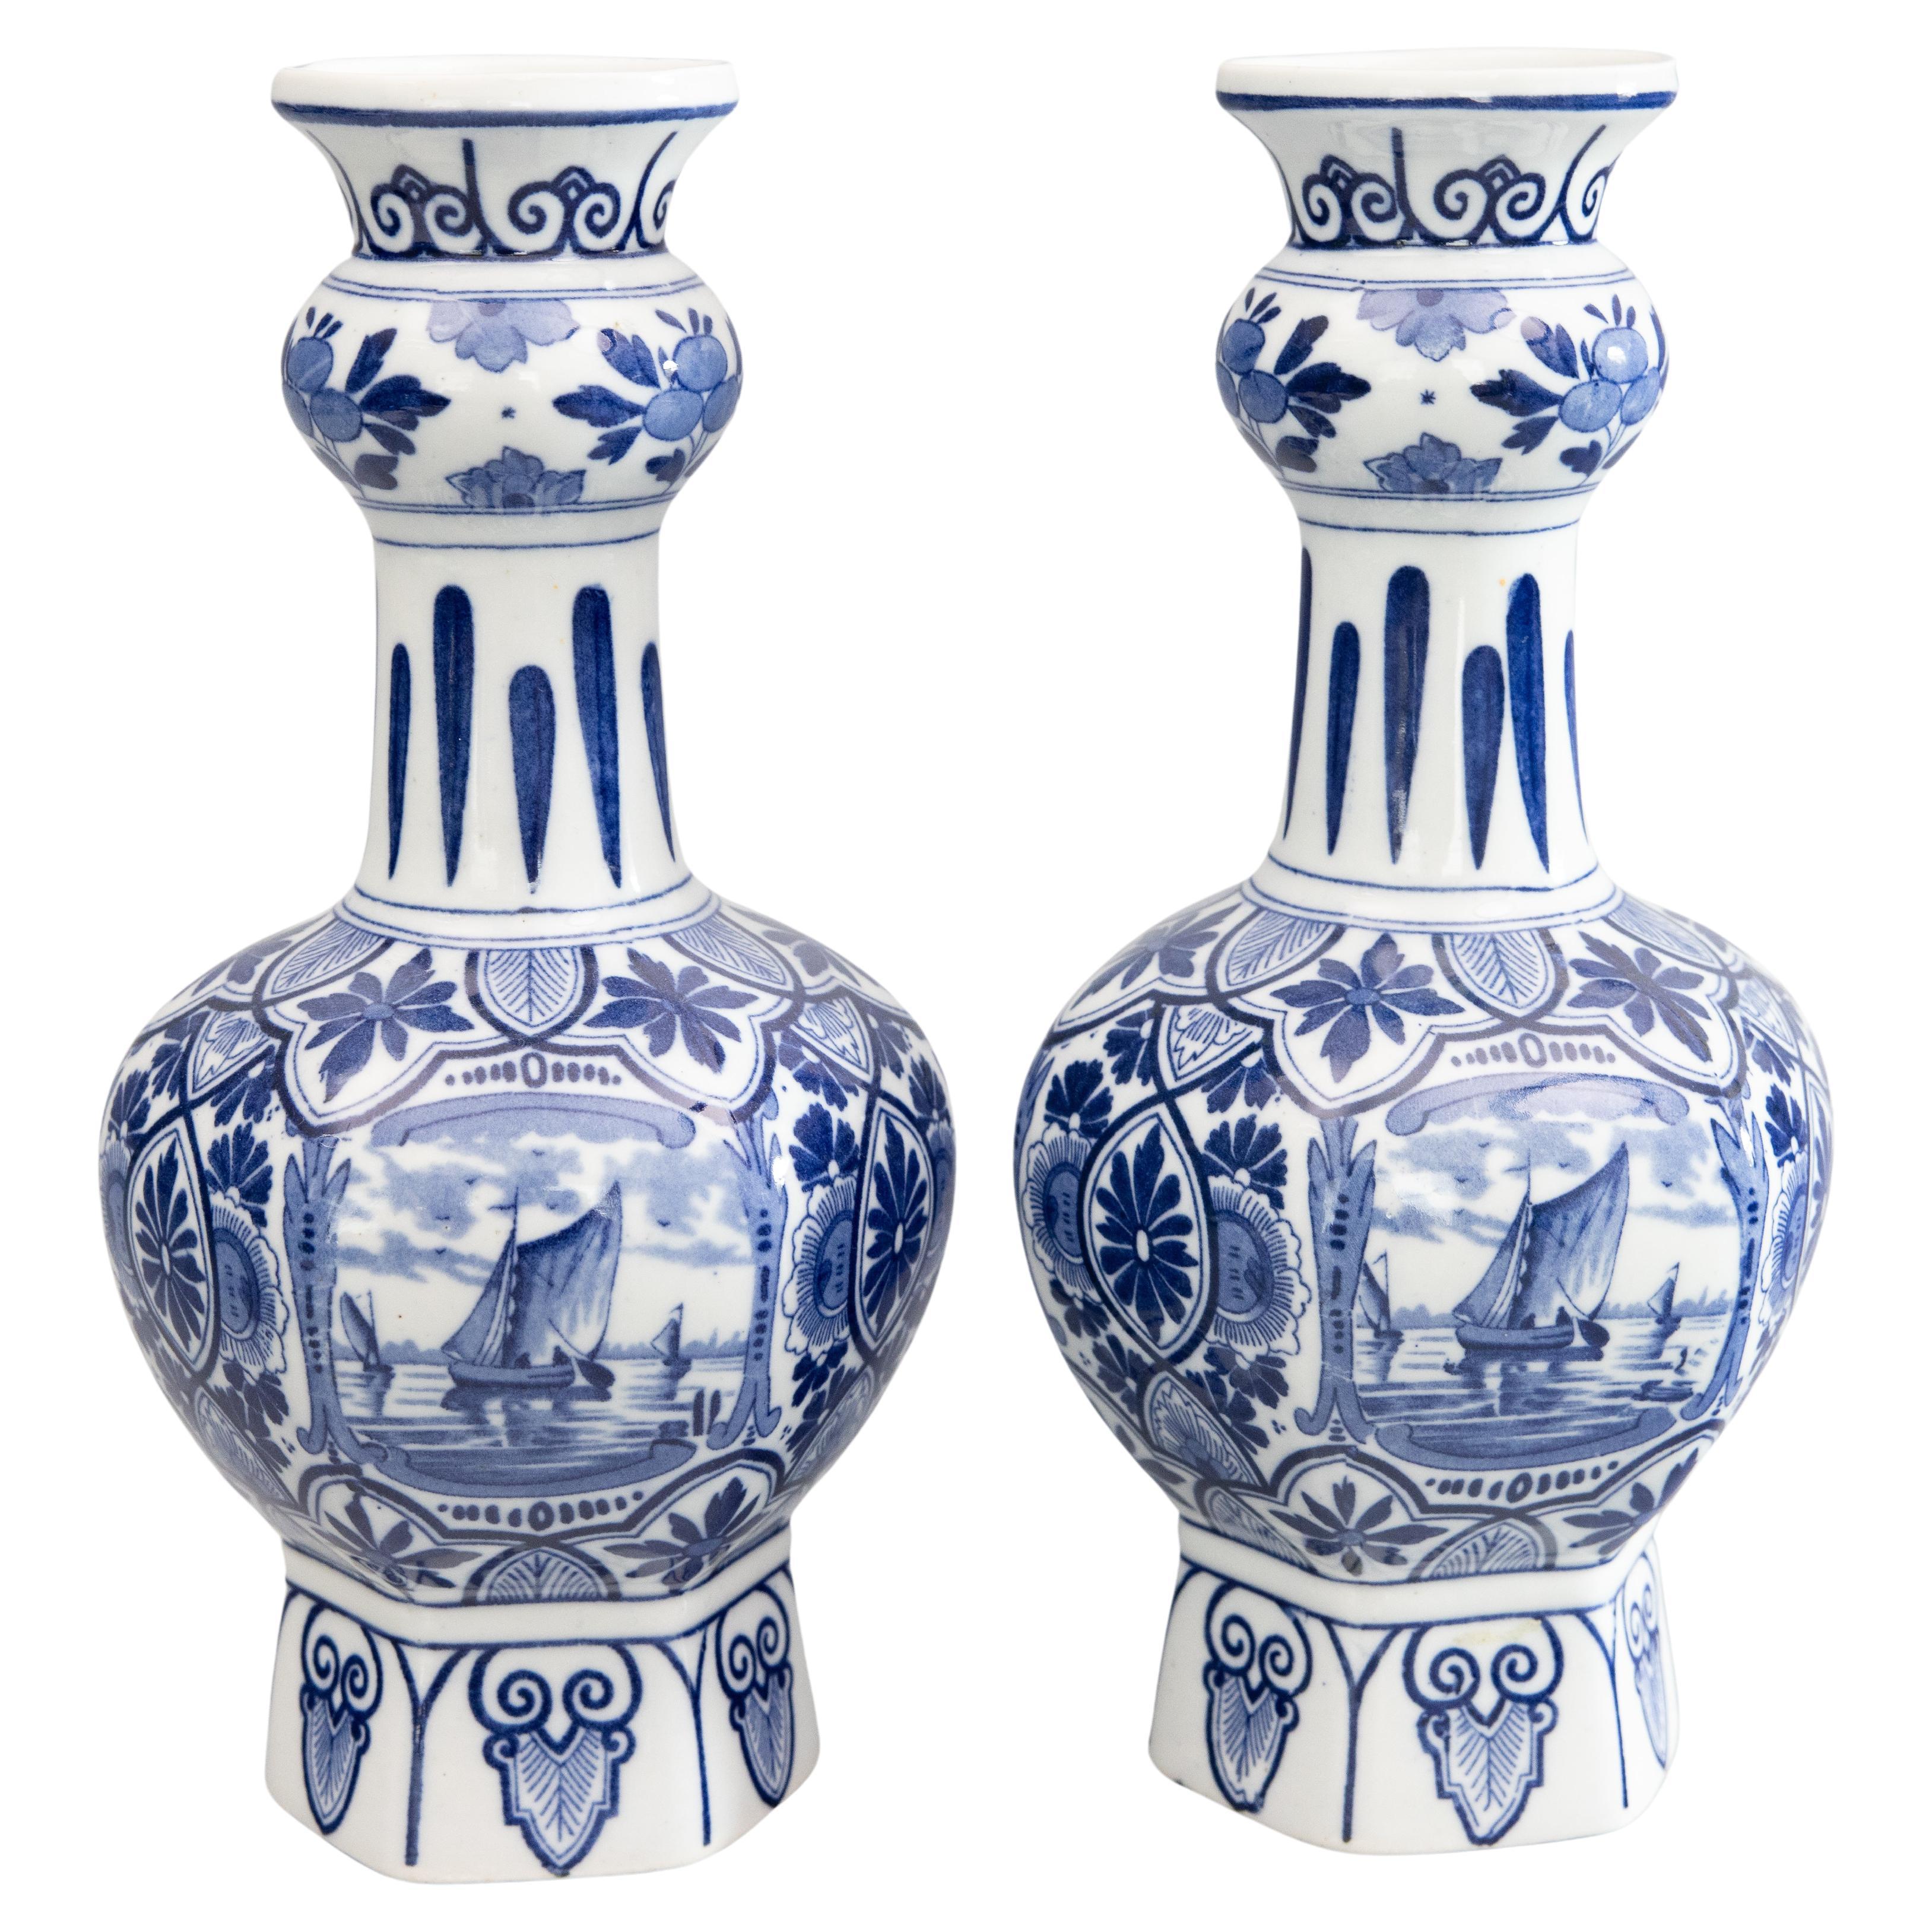 Pair of Early 20th Century Dutch Delft Faience Knobble Vases